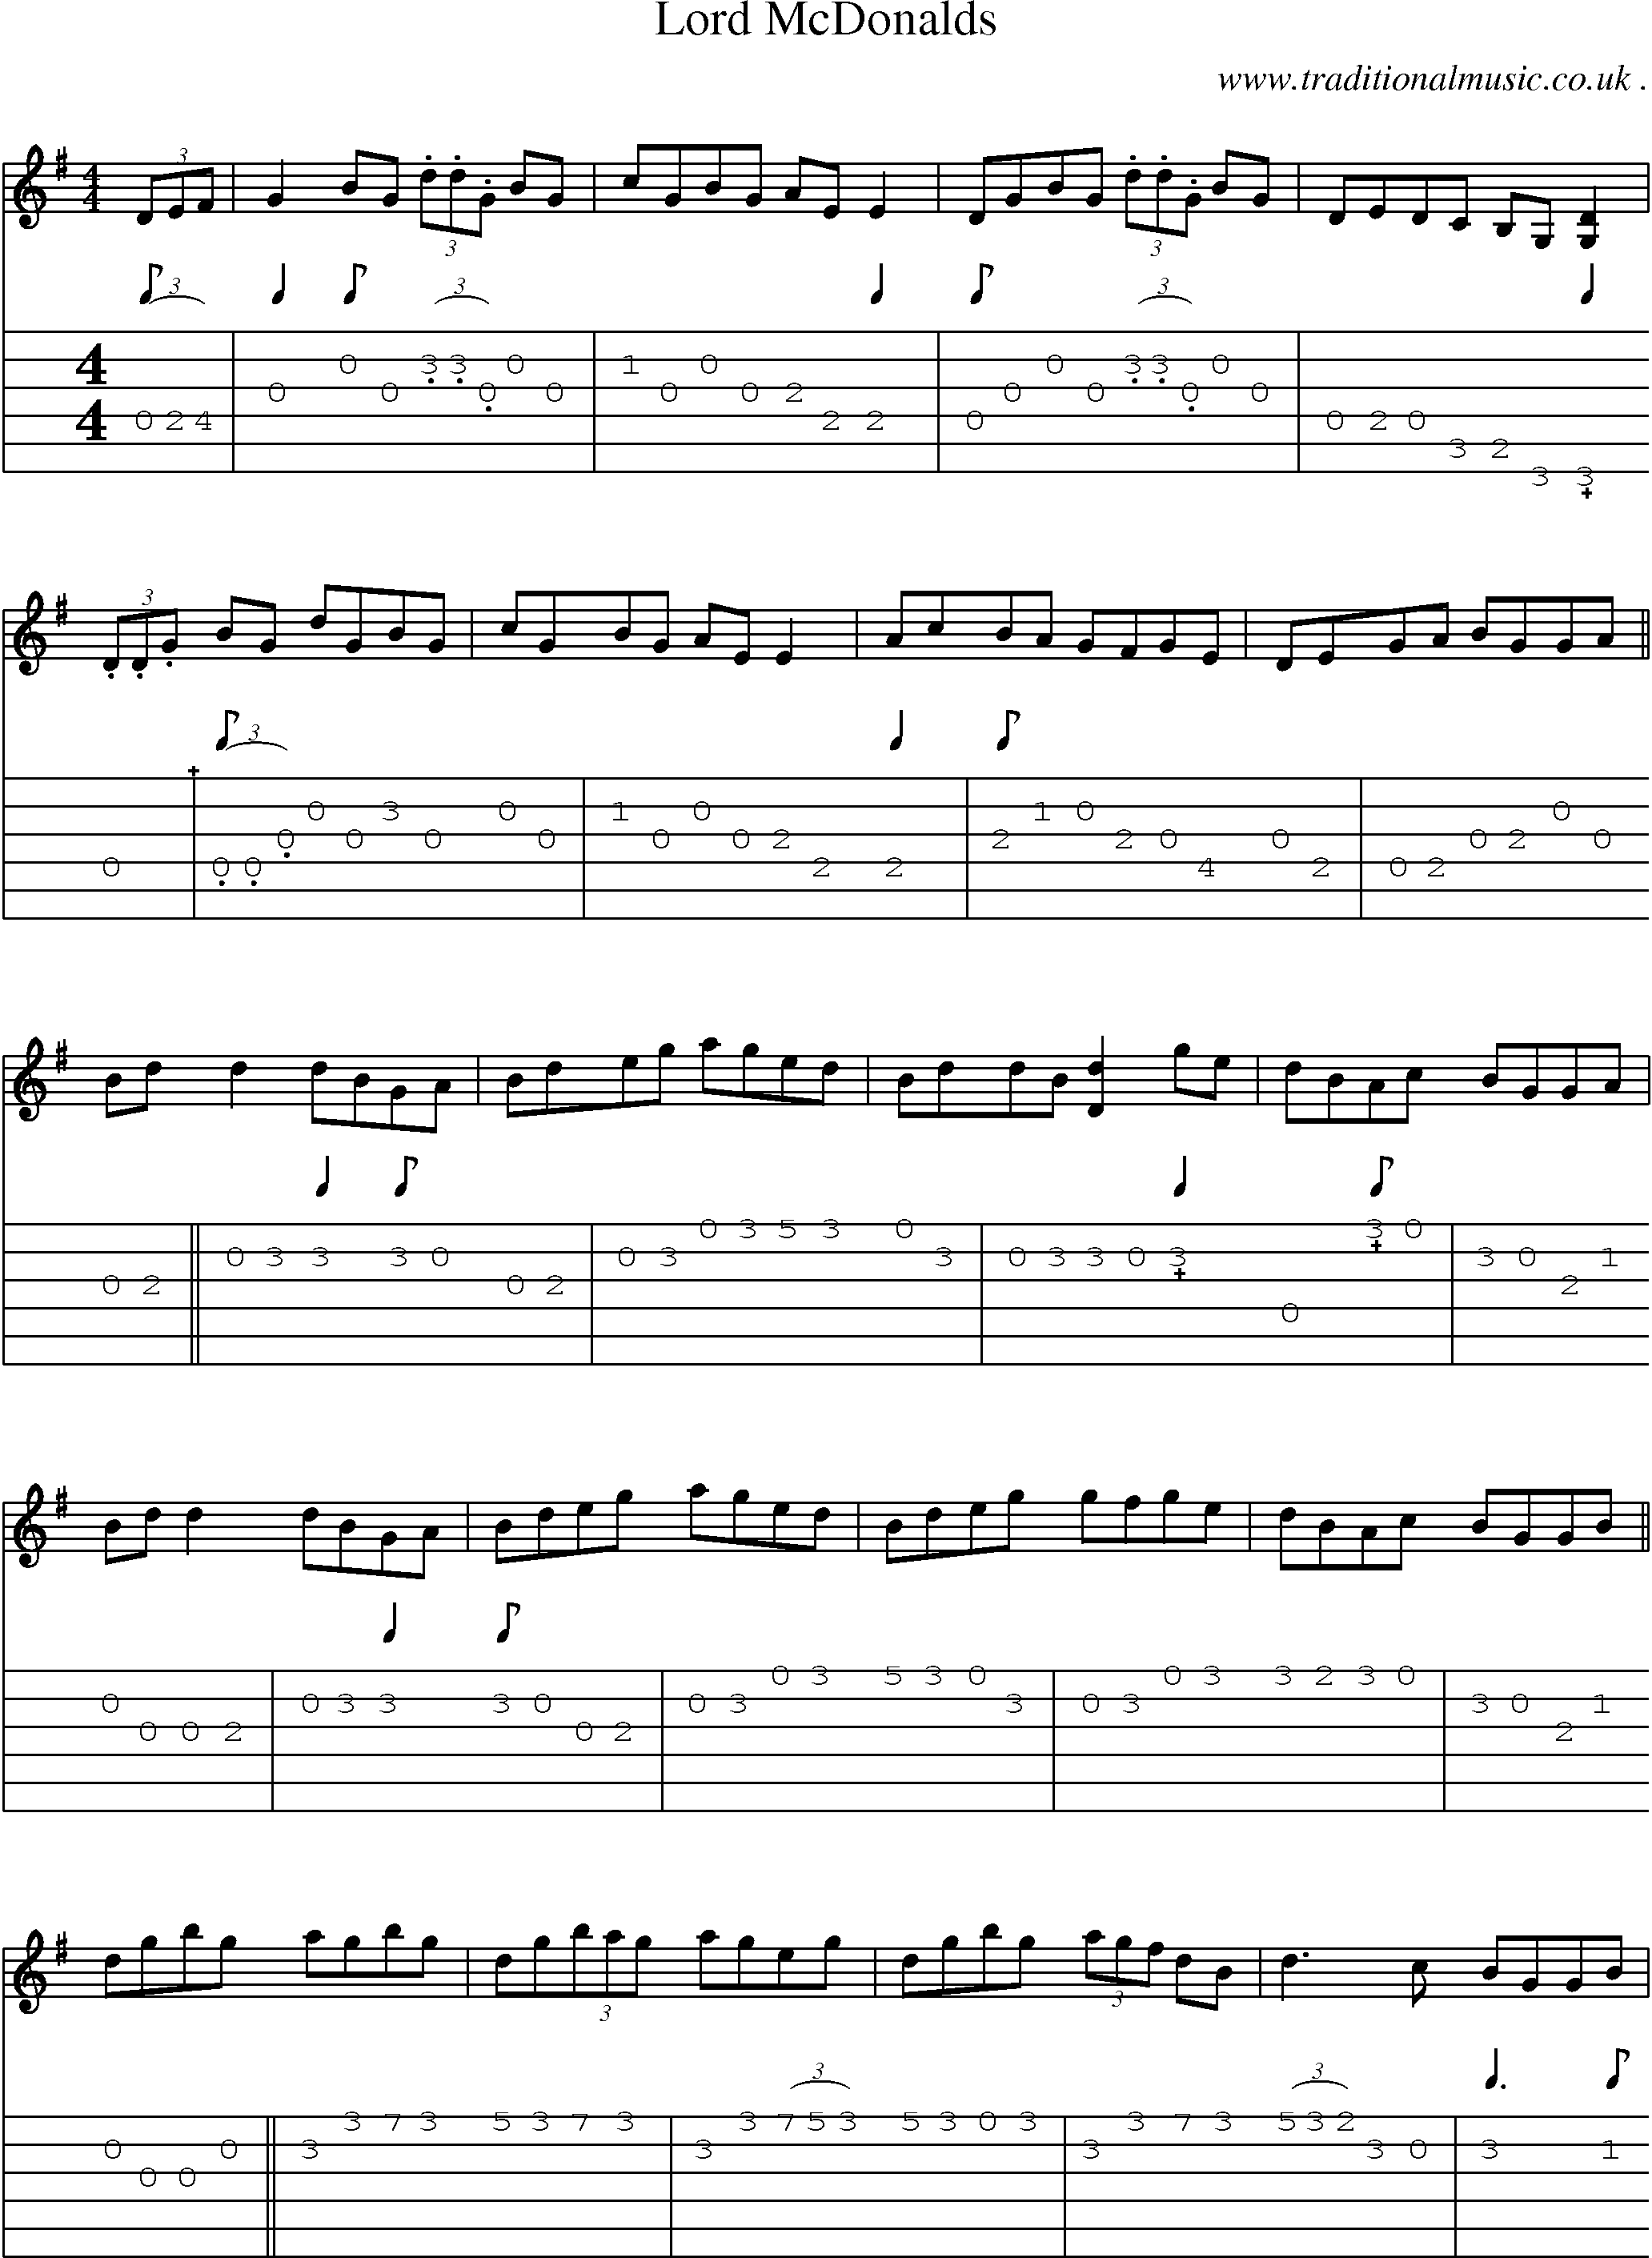 Sheet-Music and Guitar Tabs for Lord Mcdonalds